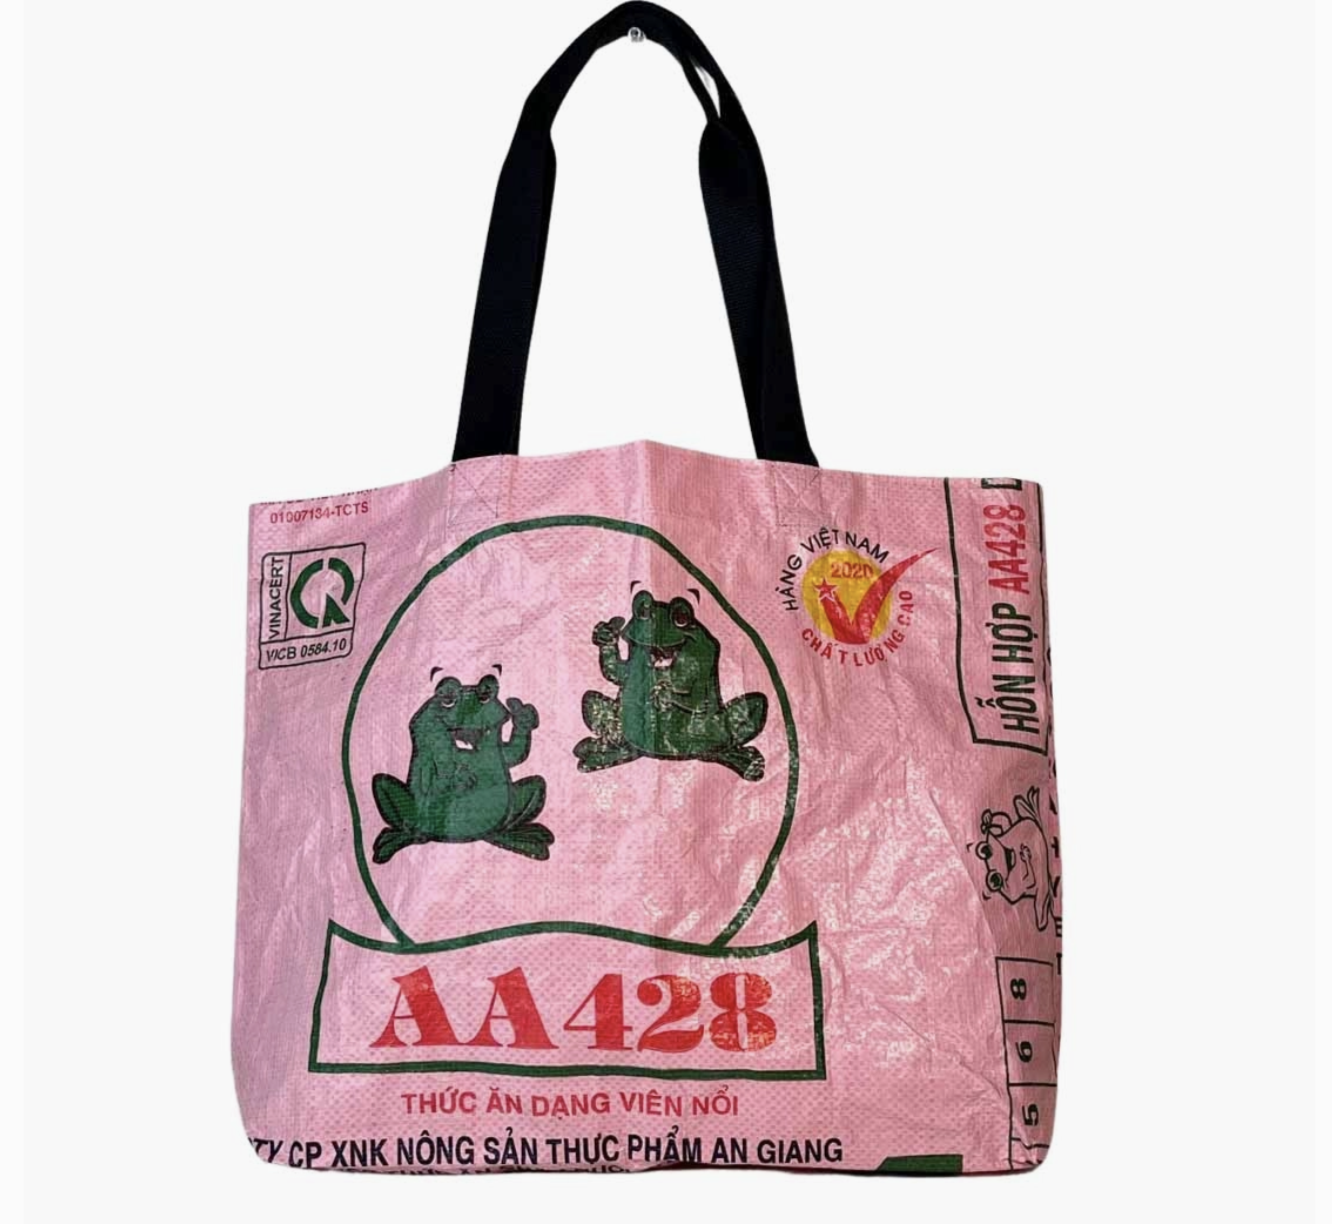 Recycled Feed Sack Cambodian Shopping Tote (Various Options to Select From)